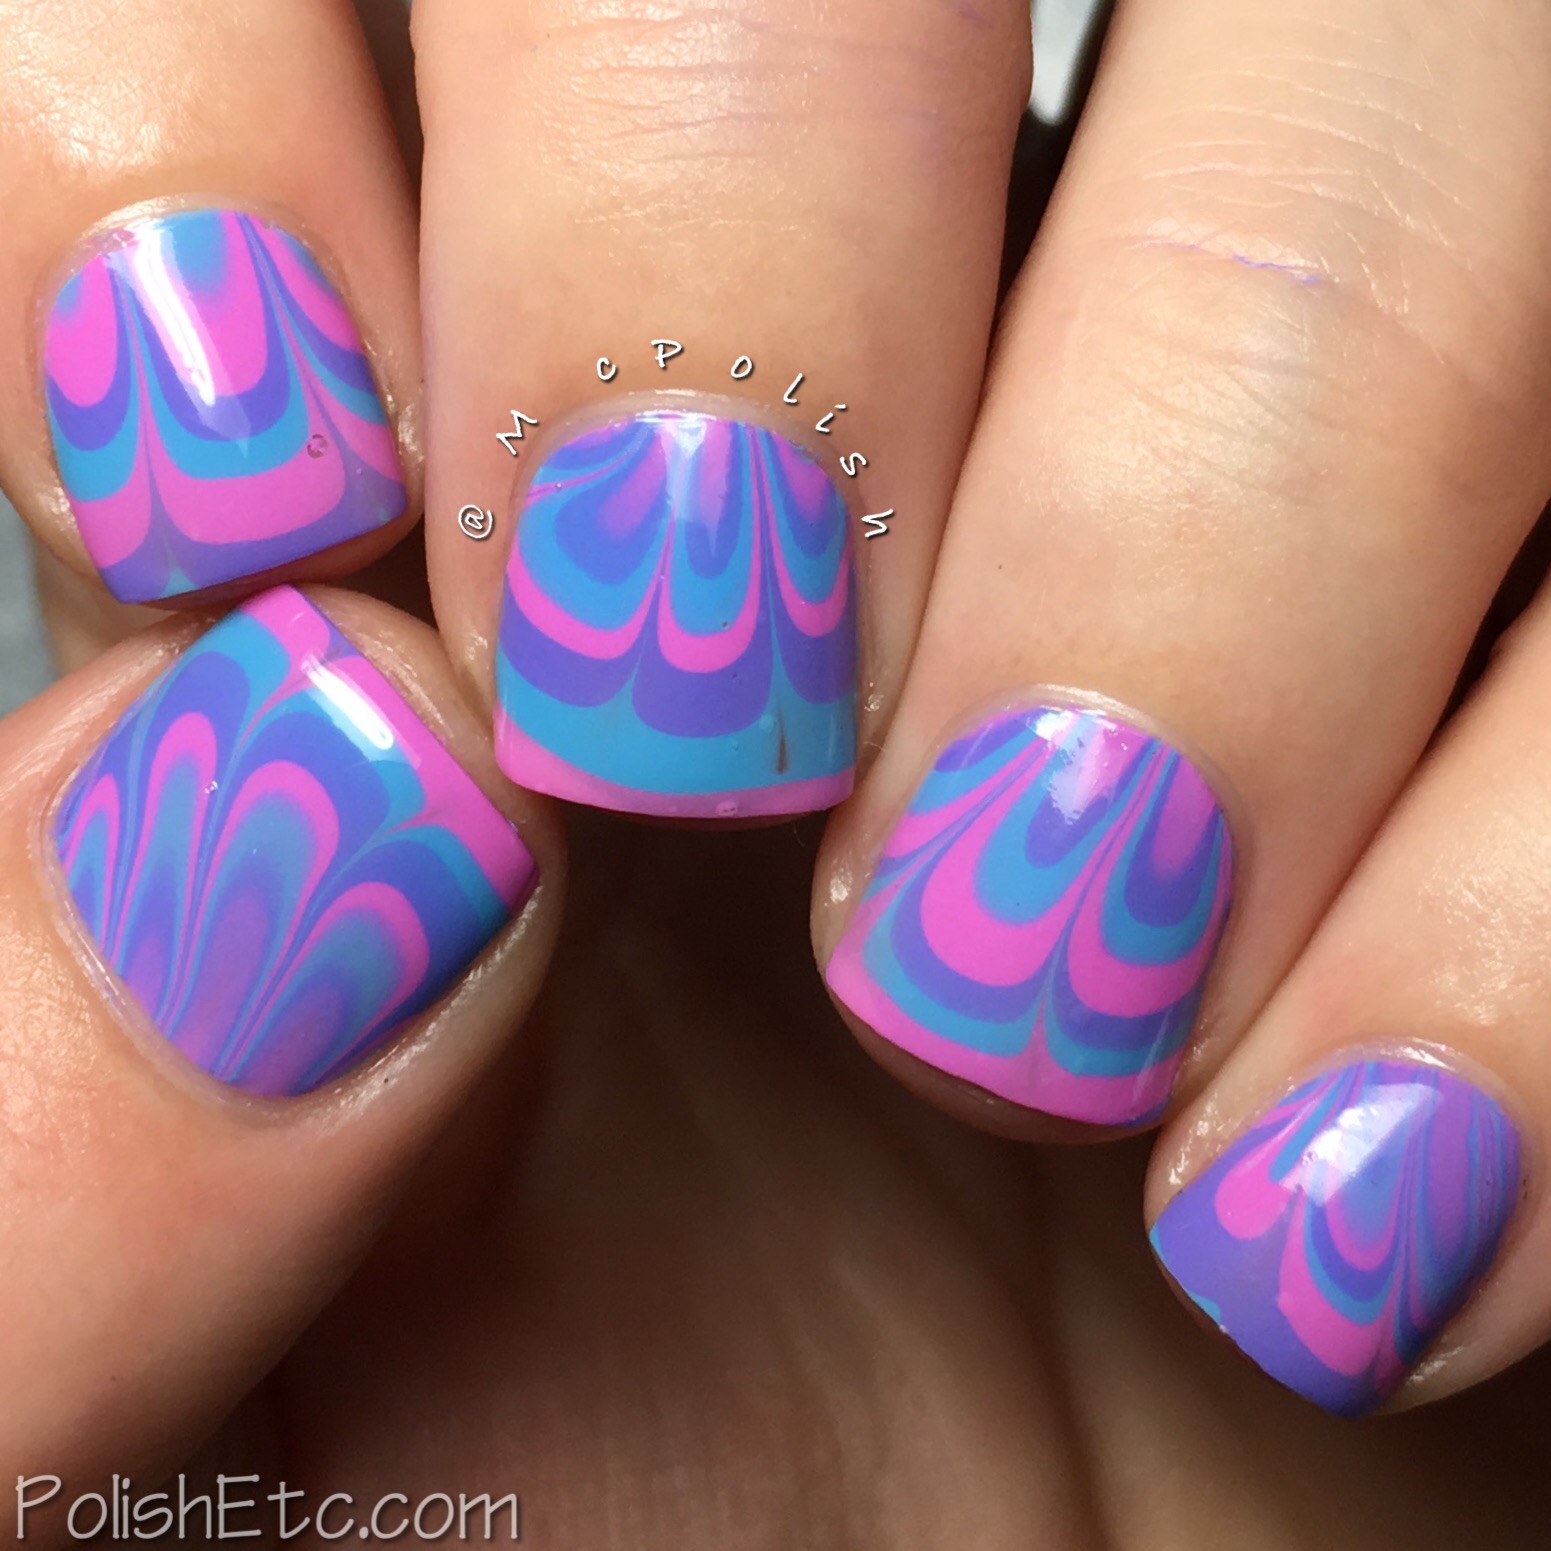 Watermarble Nails for the #31DC2016Weekly - Polish Etc.